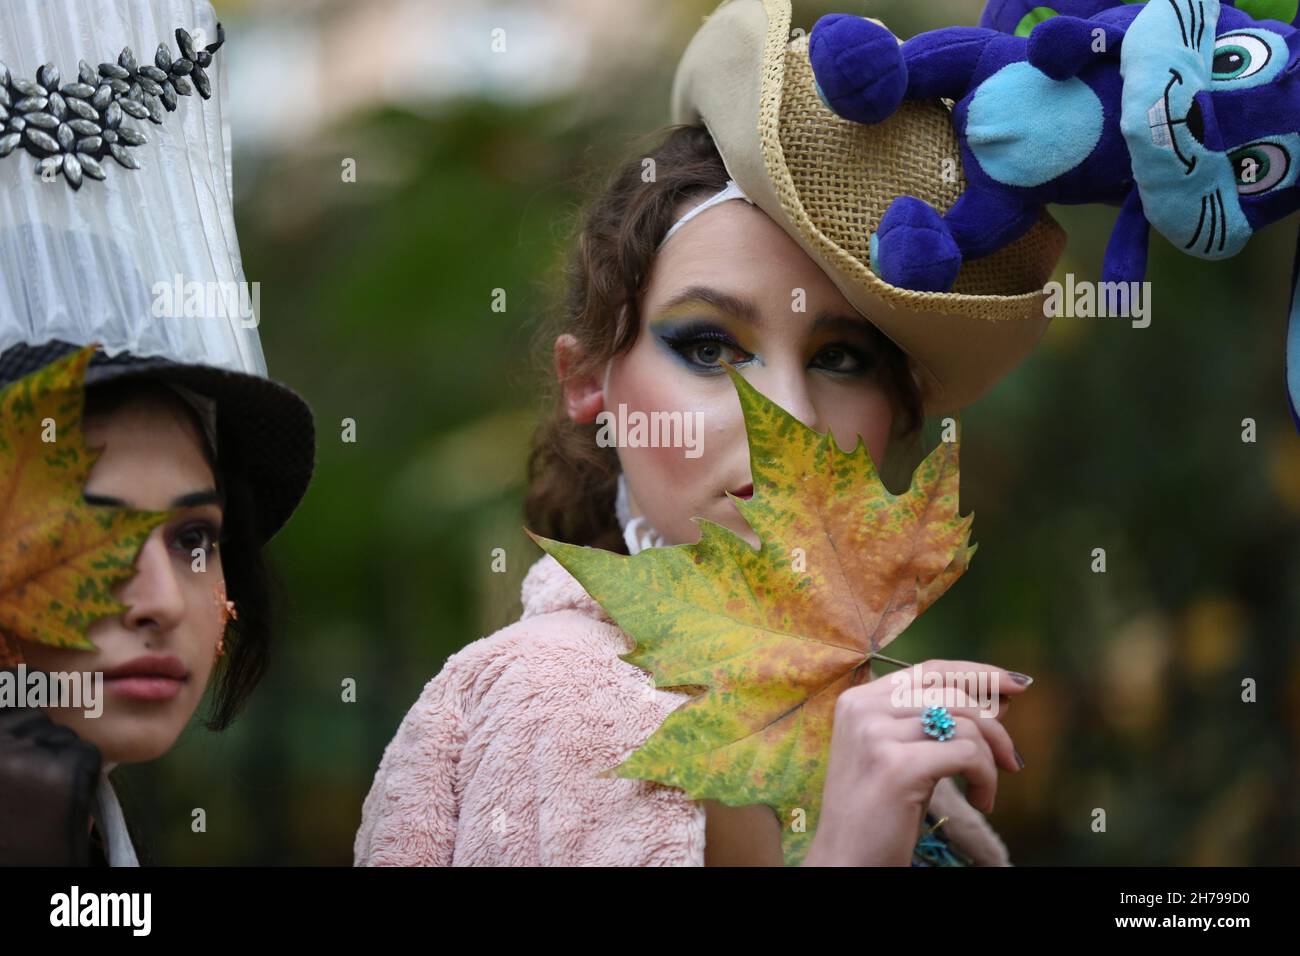 Models showcase Pierre Garroudi's collection during the designer's flash mob fashion show in London, UK Stock Photo